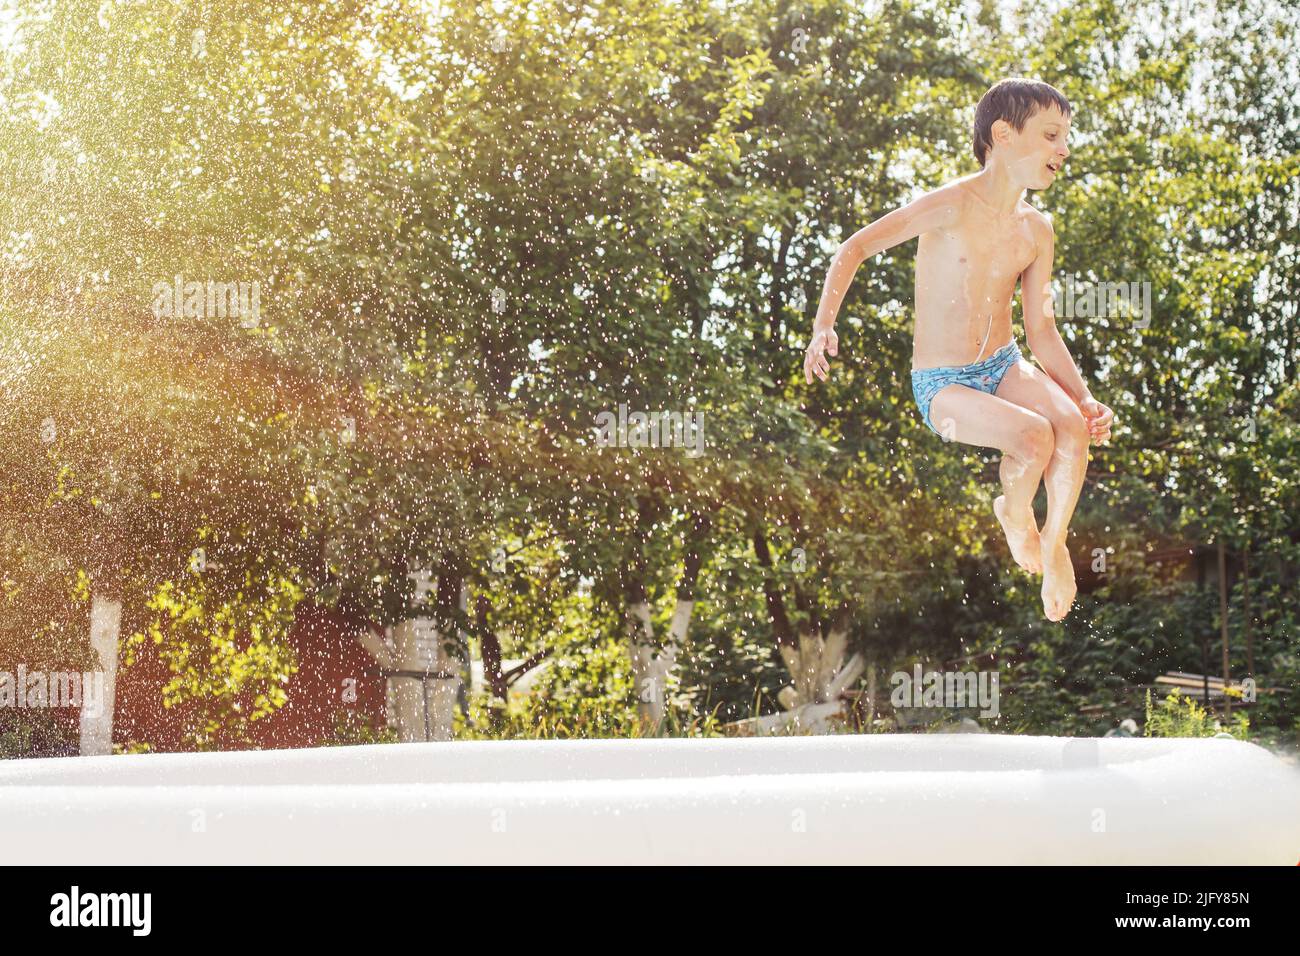 boy jumping into the swimming pool in the garden at summer. Stock Photo